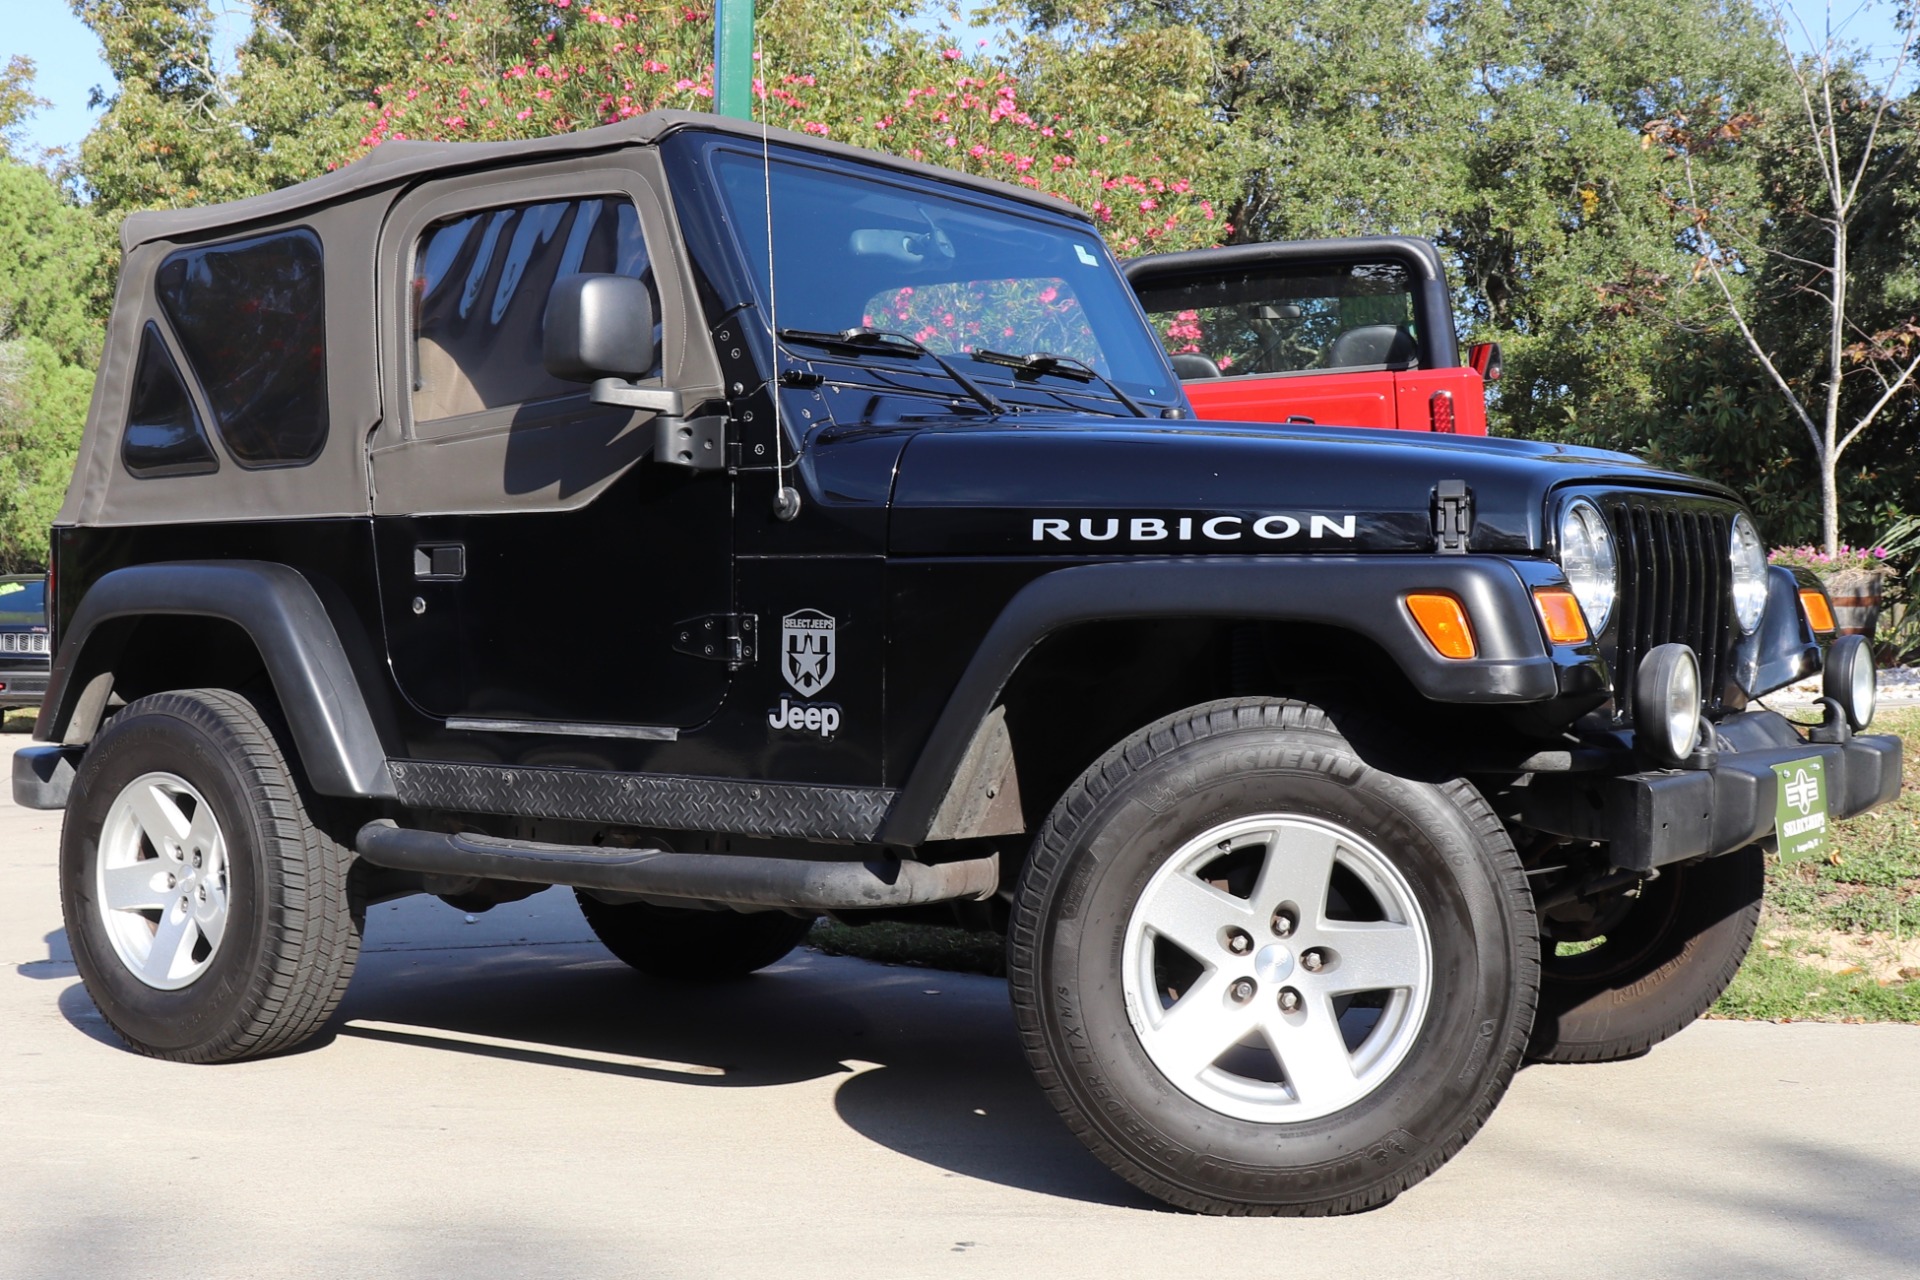 Used 2006 Jeep Wrangler Rubicon For Sale ($21,995) | Select Jeeps Inc.  Stock #779109